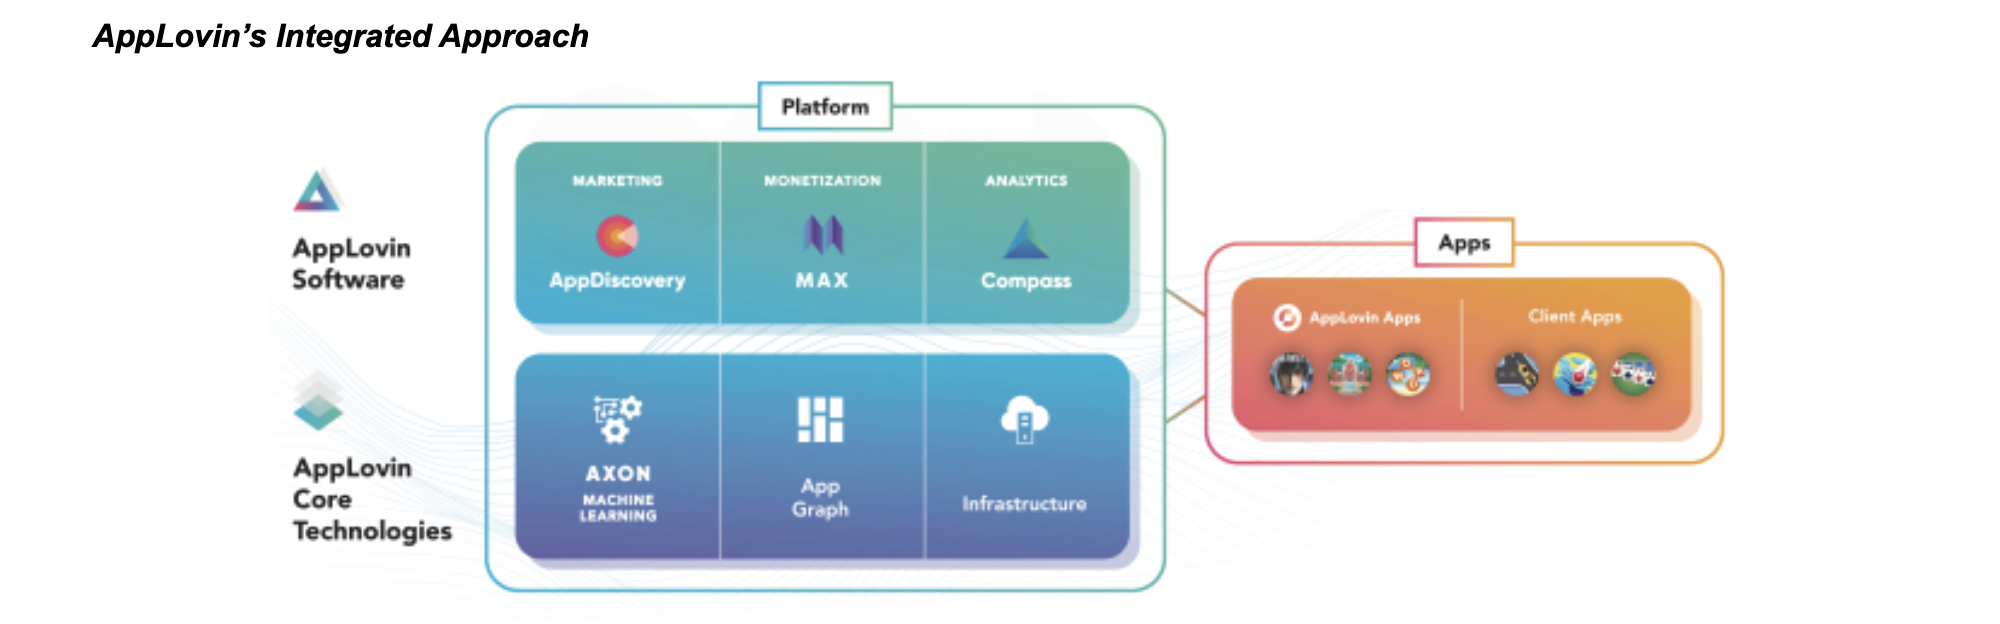 AppLovin's Integrated Approach